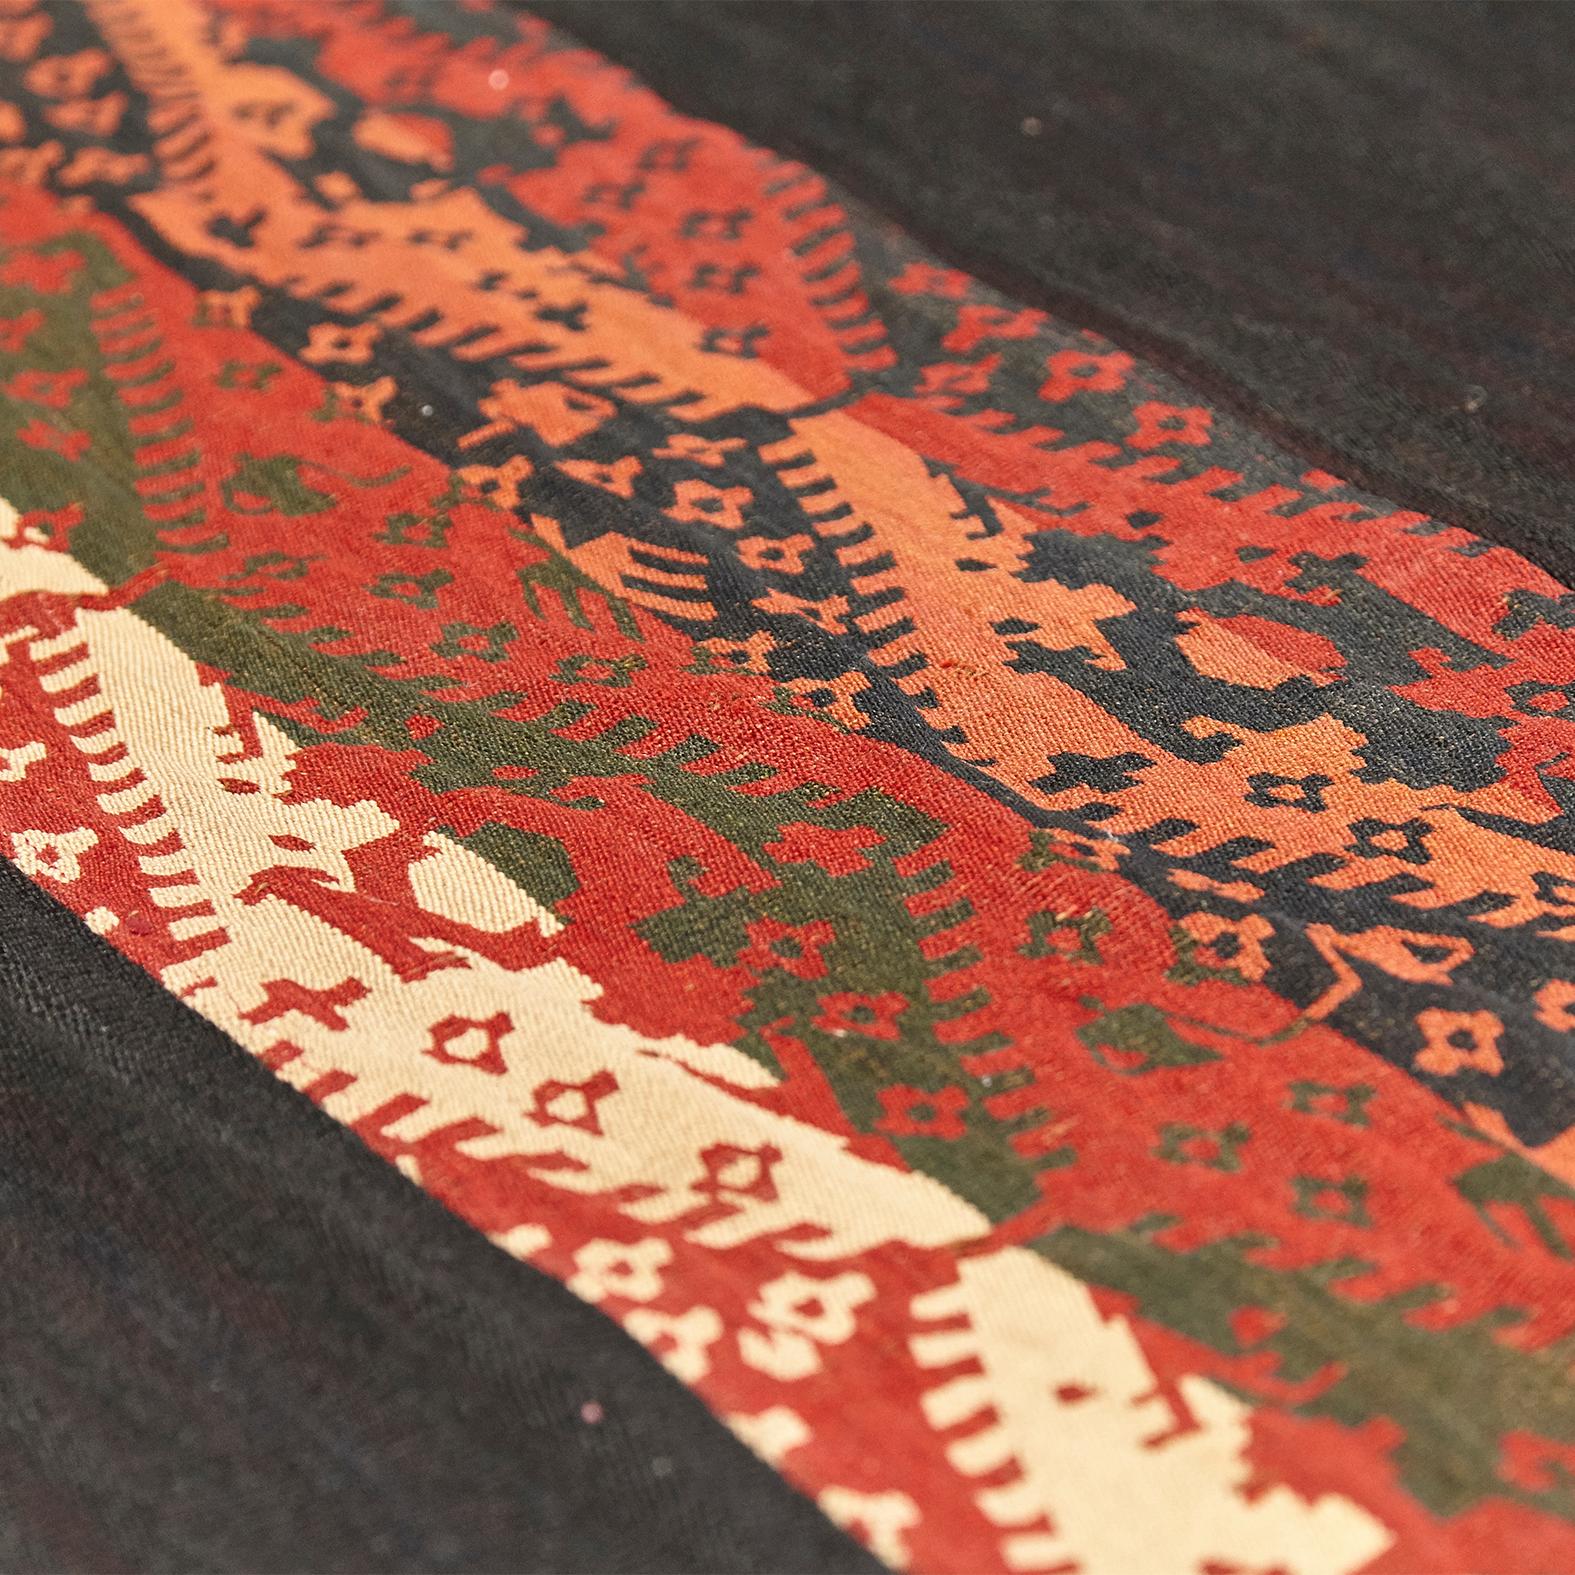 Rug Van from Turkey manufactured, circa 2000

Composition with vintage wool fabrics from East Turkey

Measures: 170 x 172

170 x 172 D8
20129.